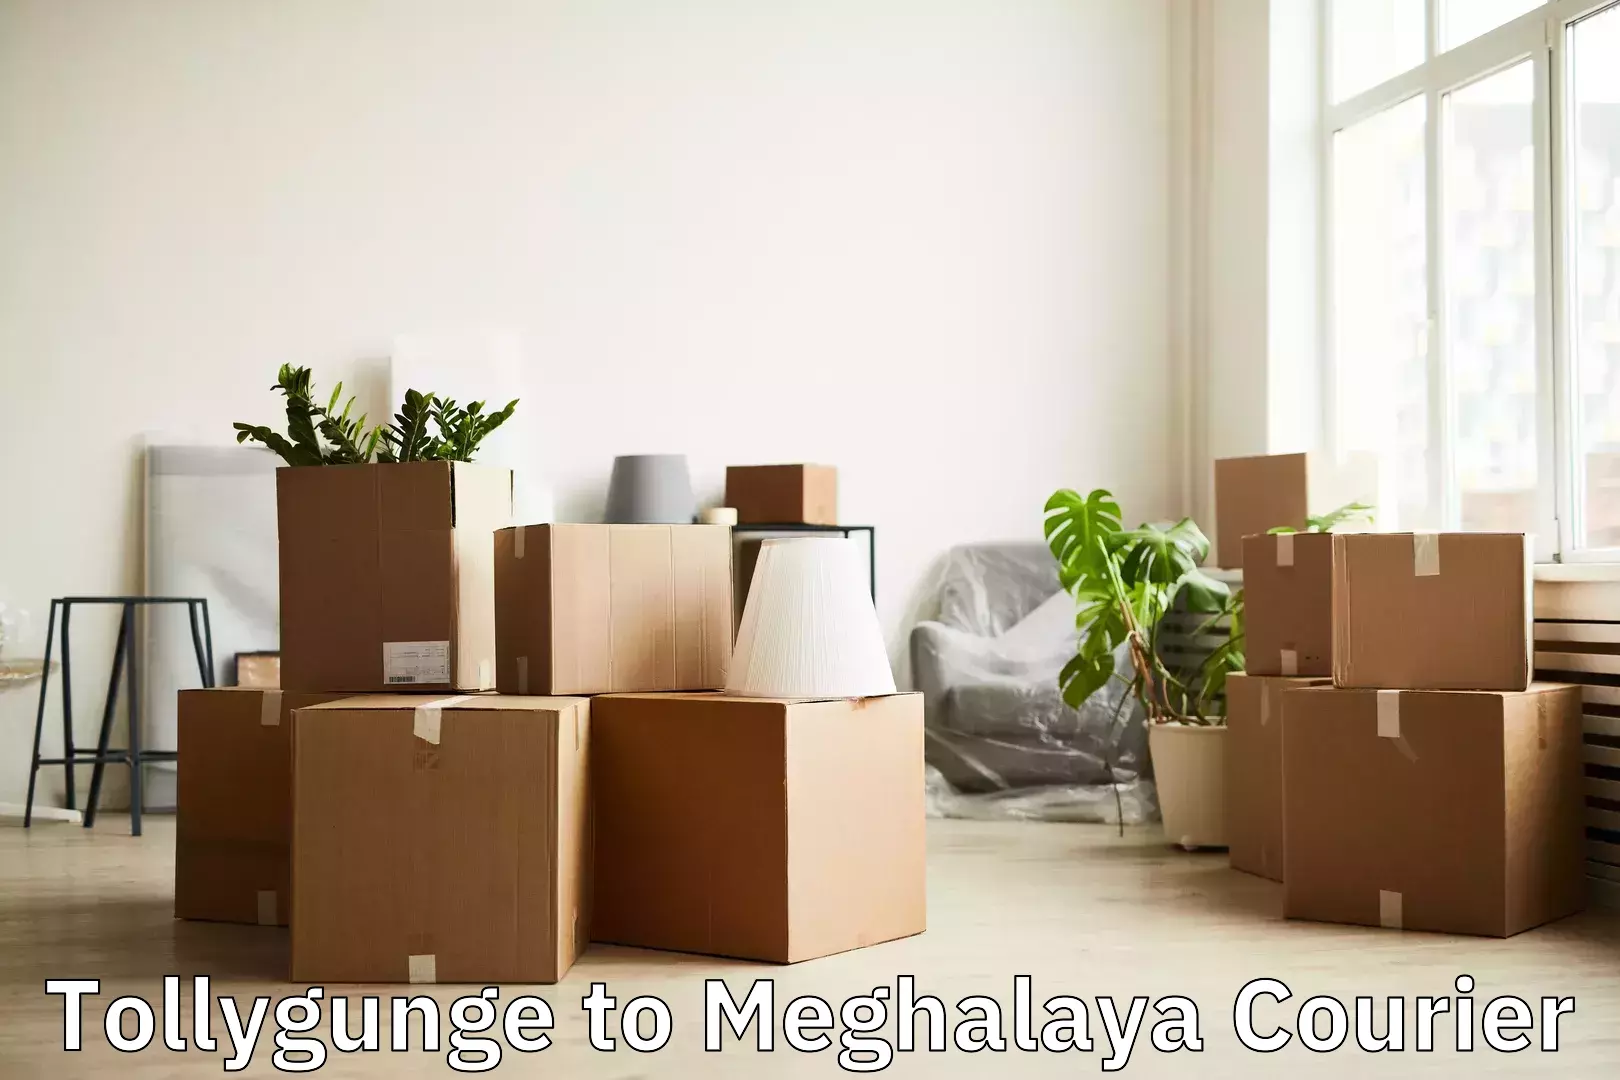 Simplified luggage transport Tollygunge to Marshillong